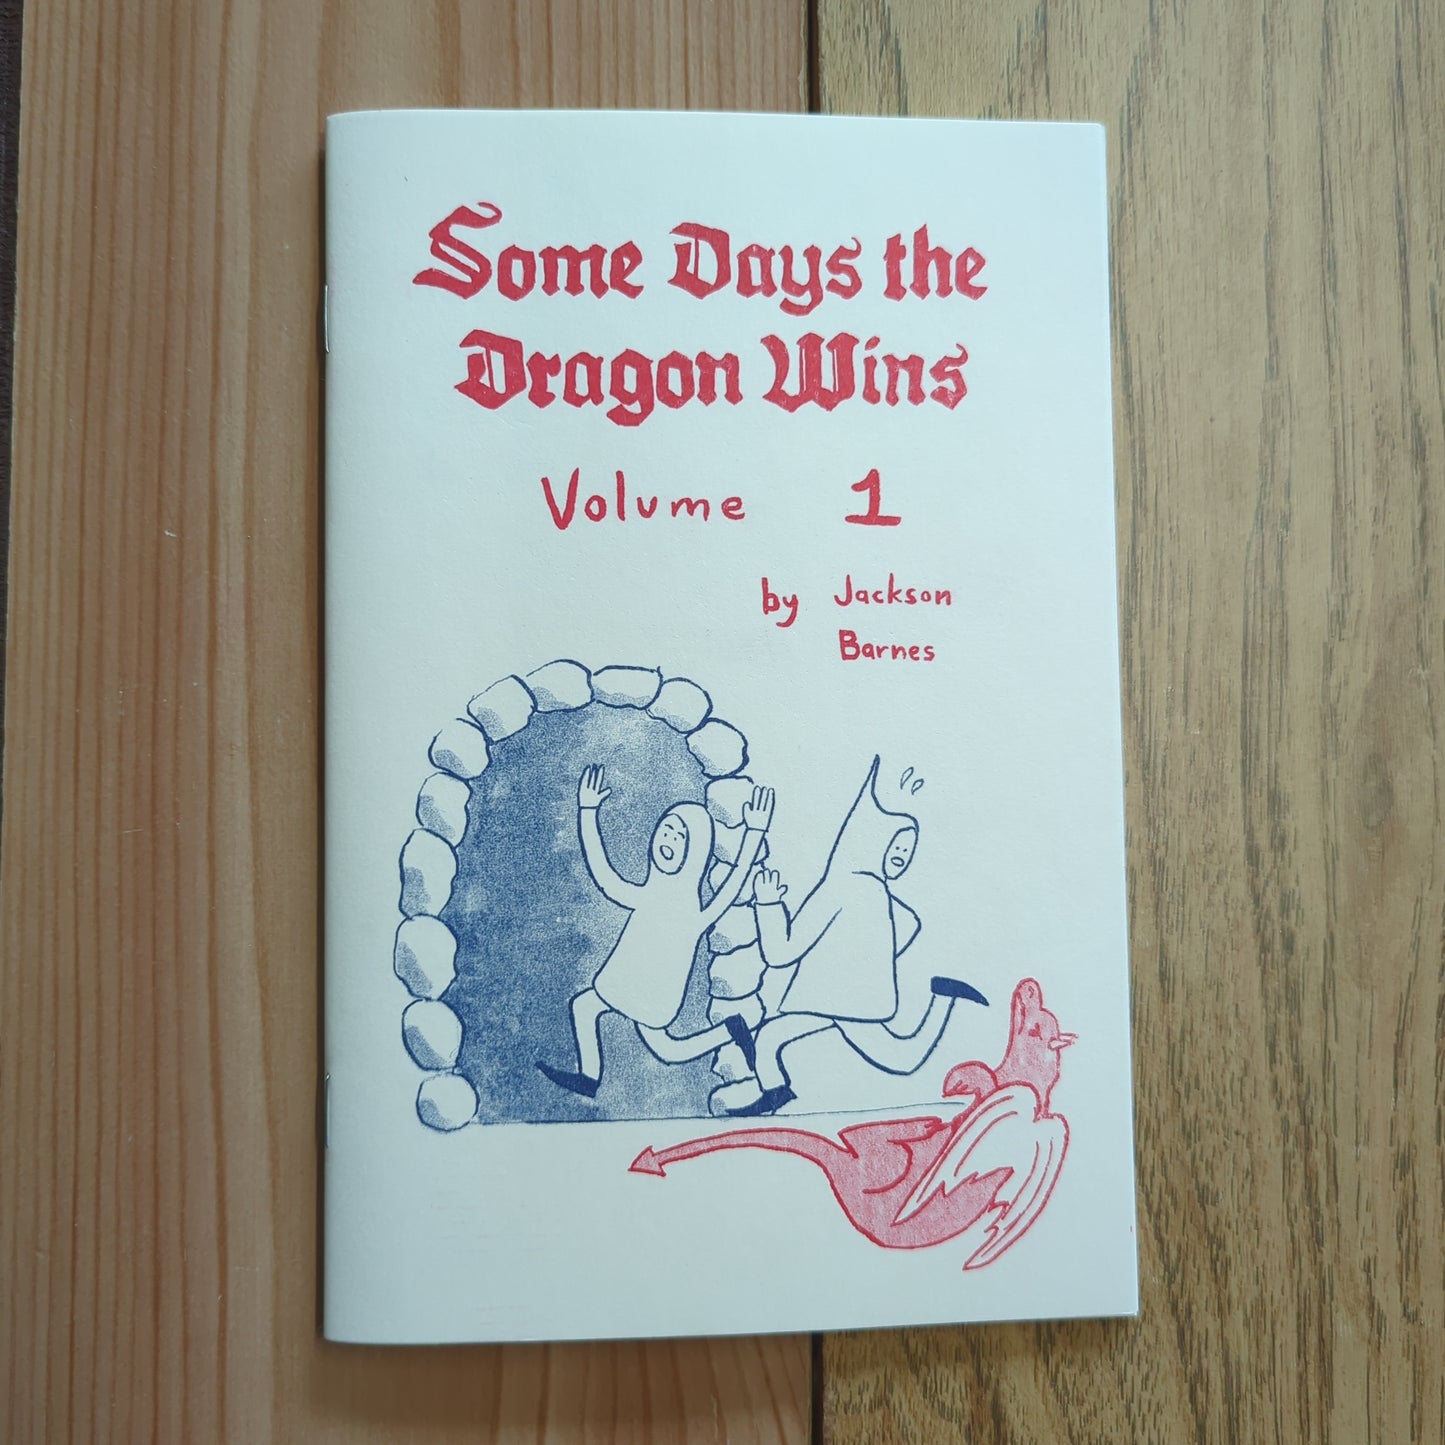 Some Days the Dragon Wins Vol 1